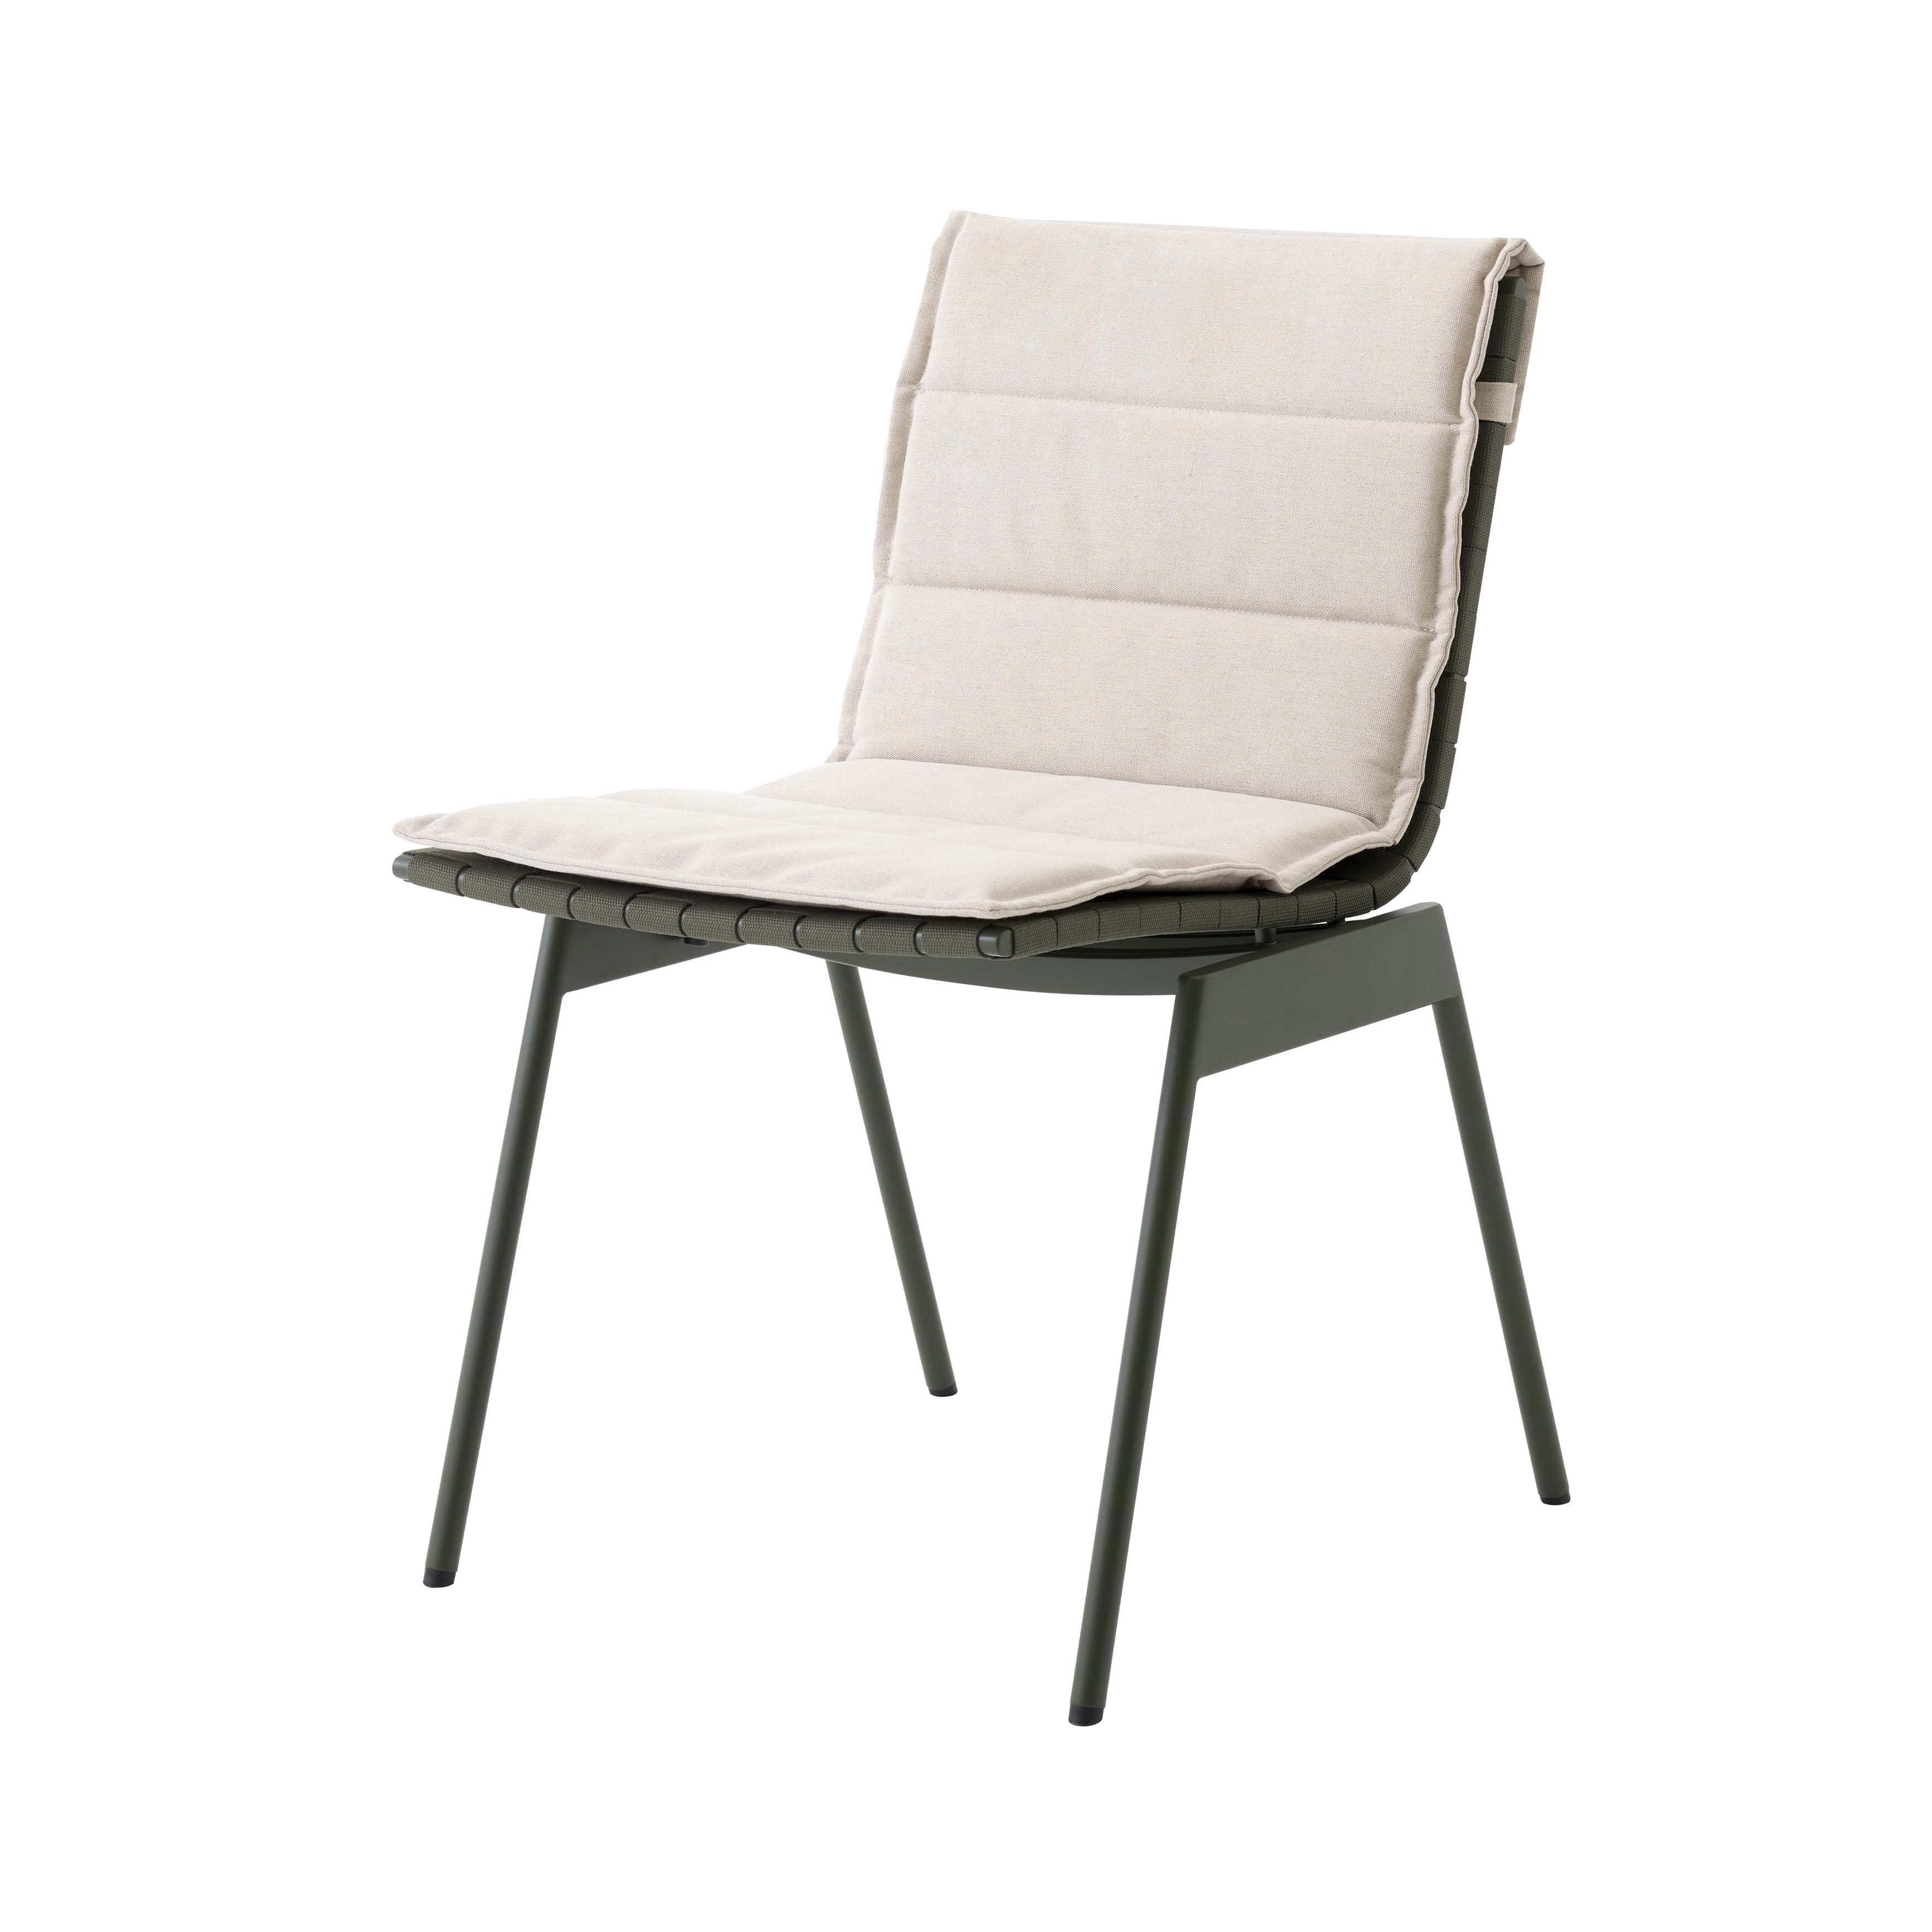 Ville AV33 Side Chair: Outdoor + Bronze Green + With Heritage Papyrus Cushion